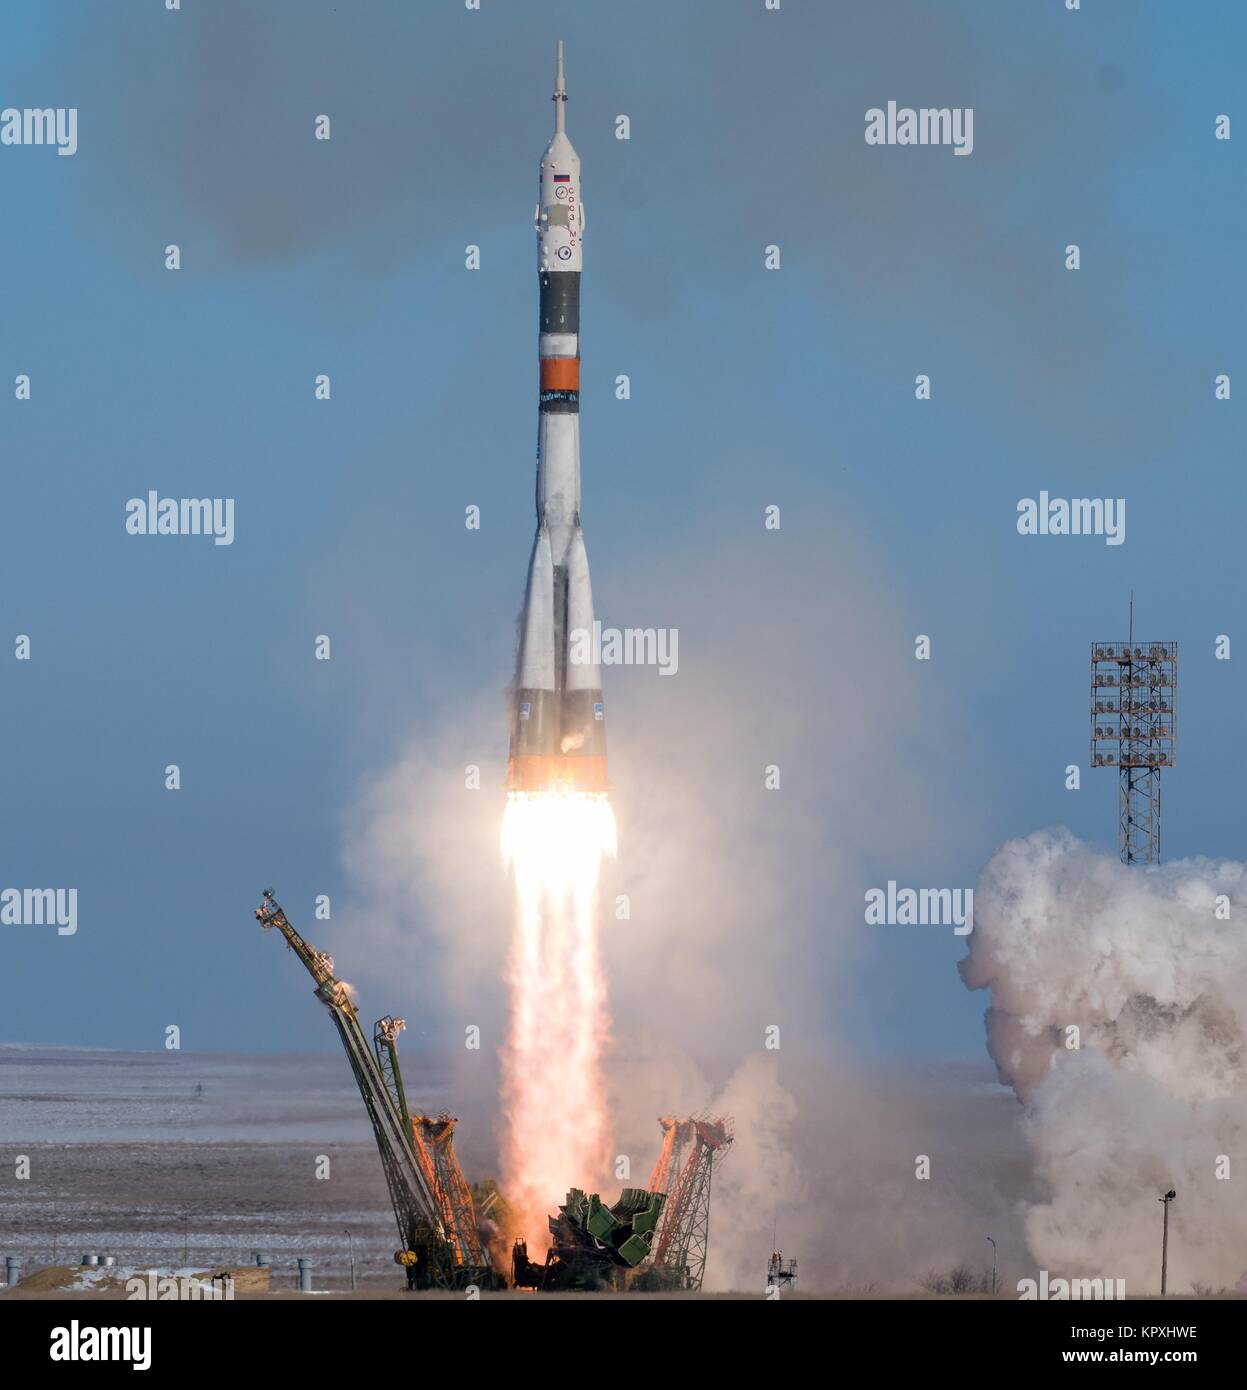 The Russian Soyuz rocket and Soyuz MS-07 spacecraft blast off from the launch pad carrying the International Space Station Expedition 54 mission crew at the Baikonur Cosmodrome December 17, 2017 in Baikonur, Kazakhstan. International Space Station Expedition 54 crew cosmonaut Anton Shkaplerov of Rosmos, astronaut Scott Tingle of NASA, and astronaut Norishige Kanai of JAXA will spend the next five months living and working aboard the orbiting laboratory. Stock Photo